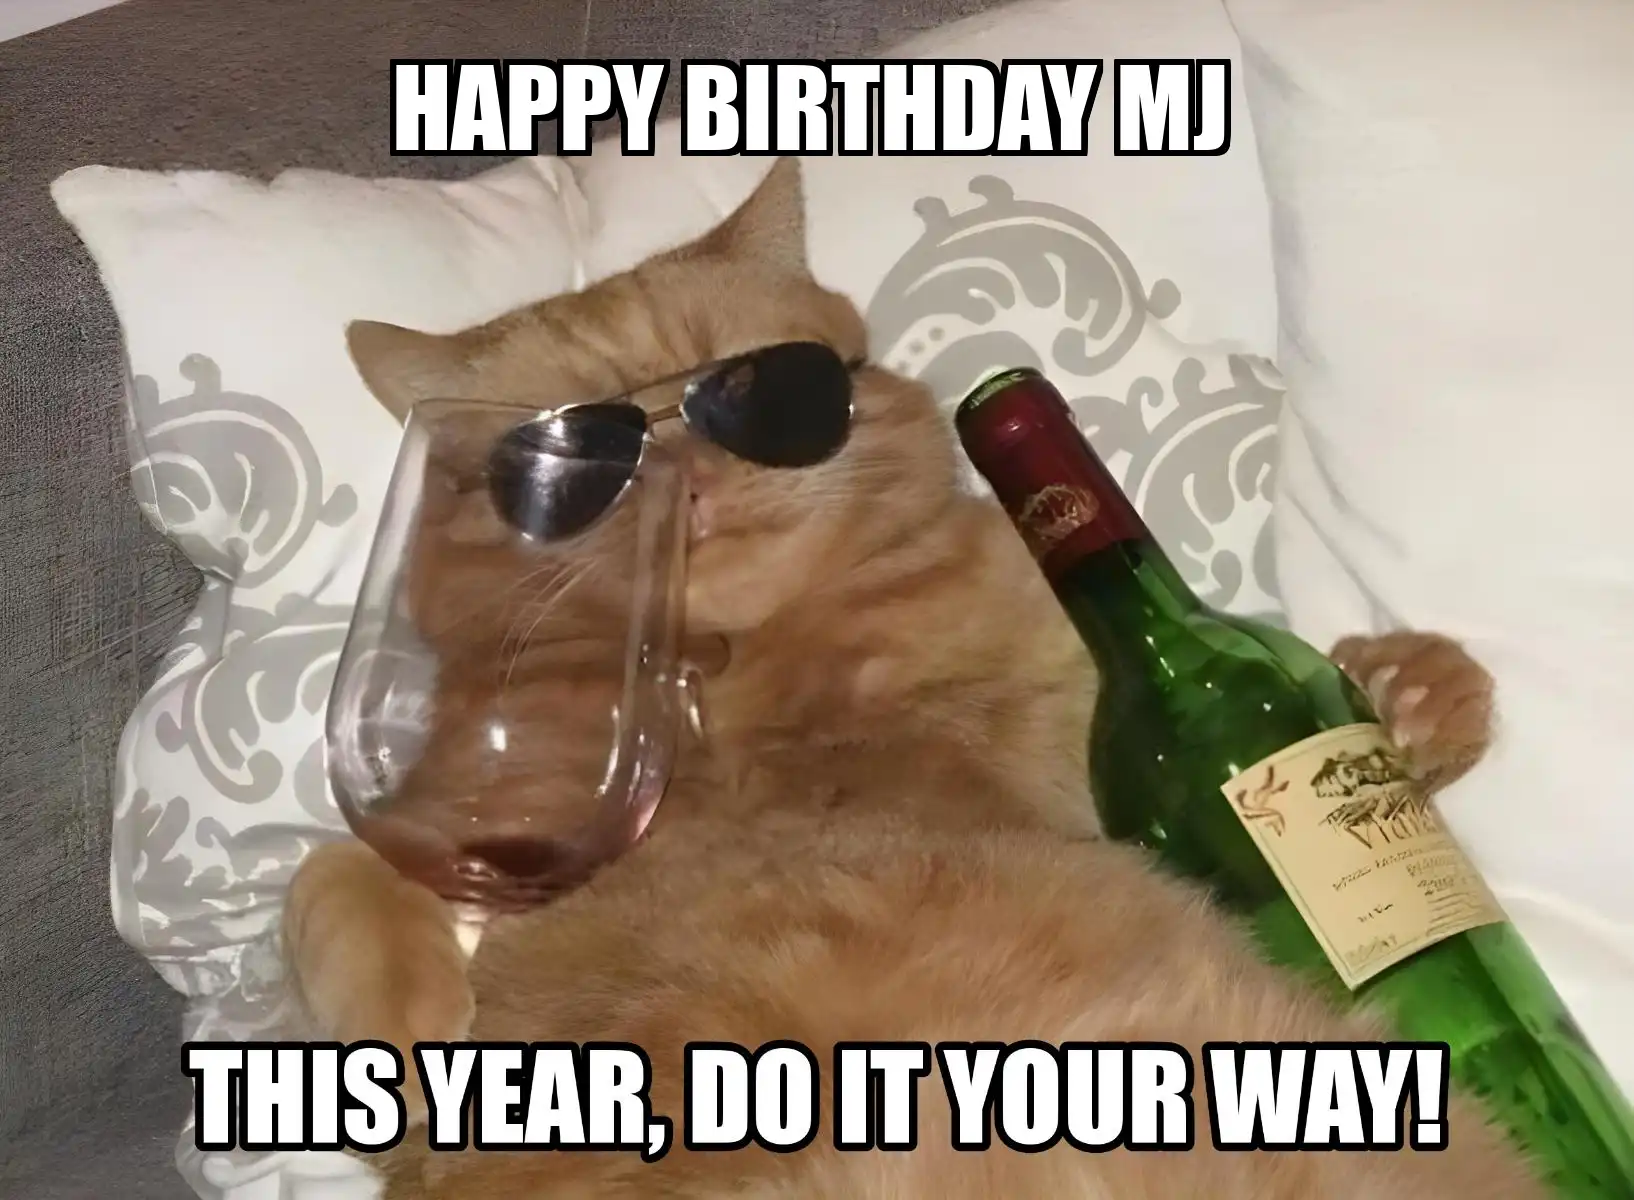 Happy Birthday Mj This Year Do It Your Way Meme